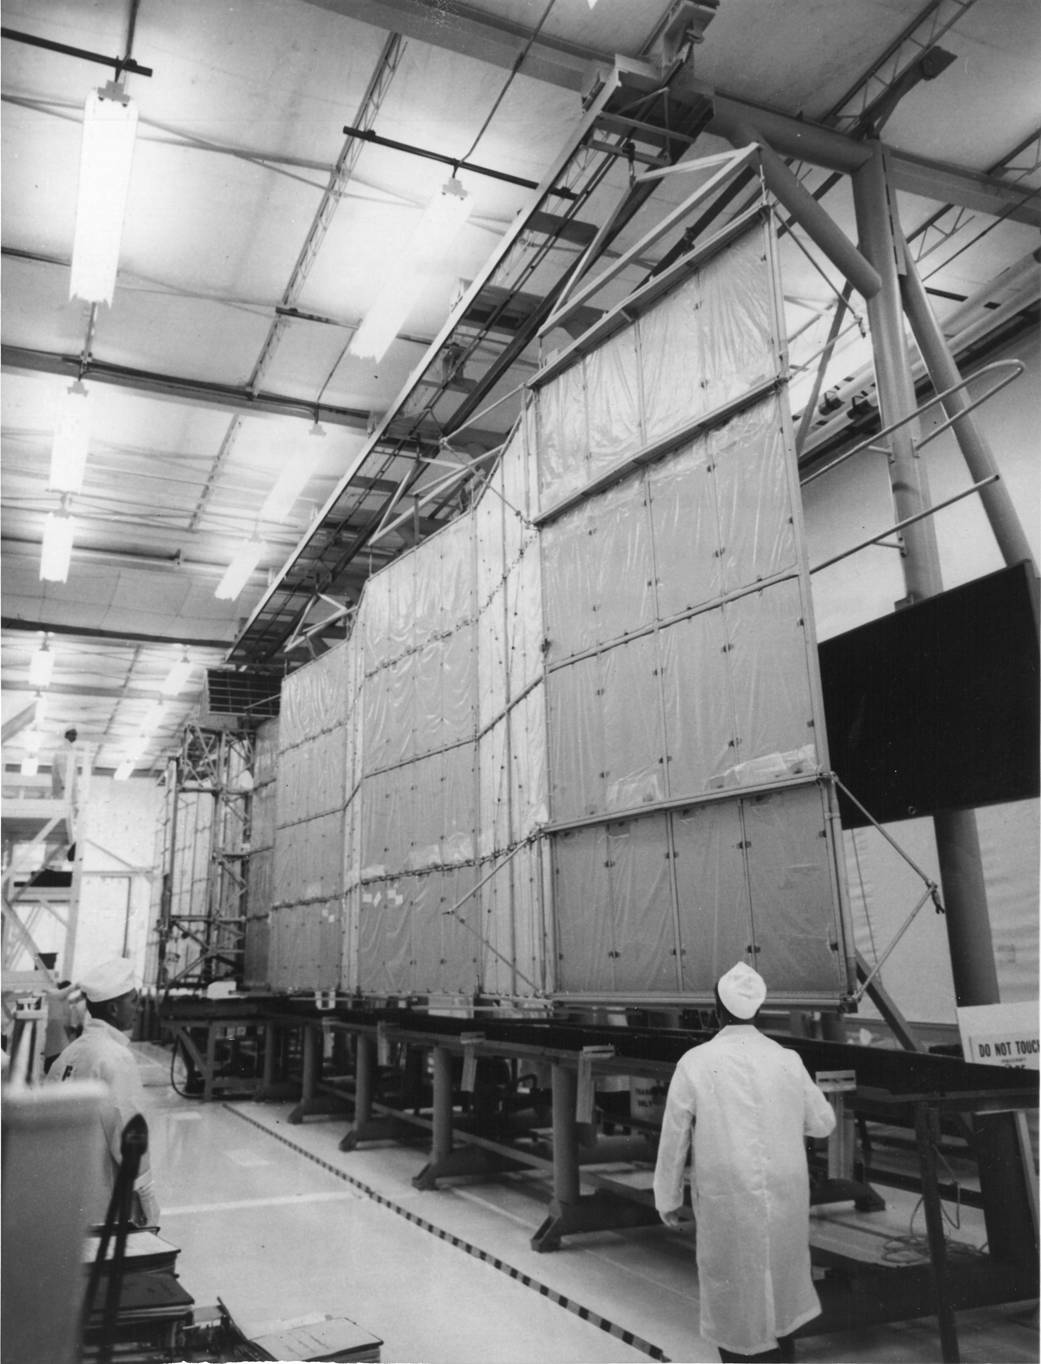 This week in 1965, technicians at Kennedy Space Center attached the Pegasus C satellite to the SA-10 Instrument Unit, S-IU-10.